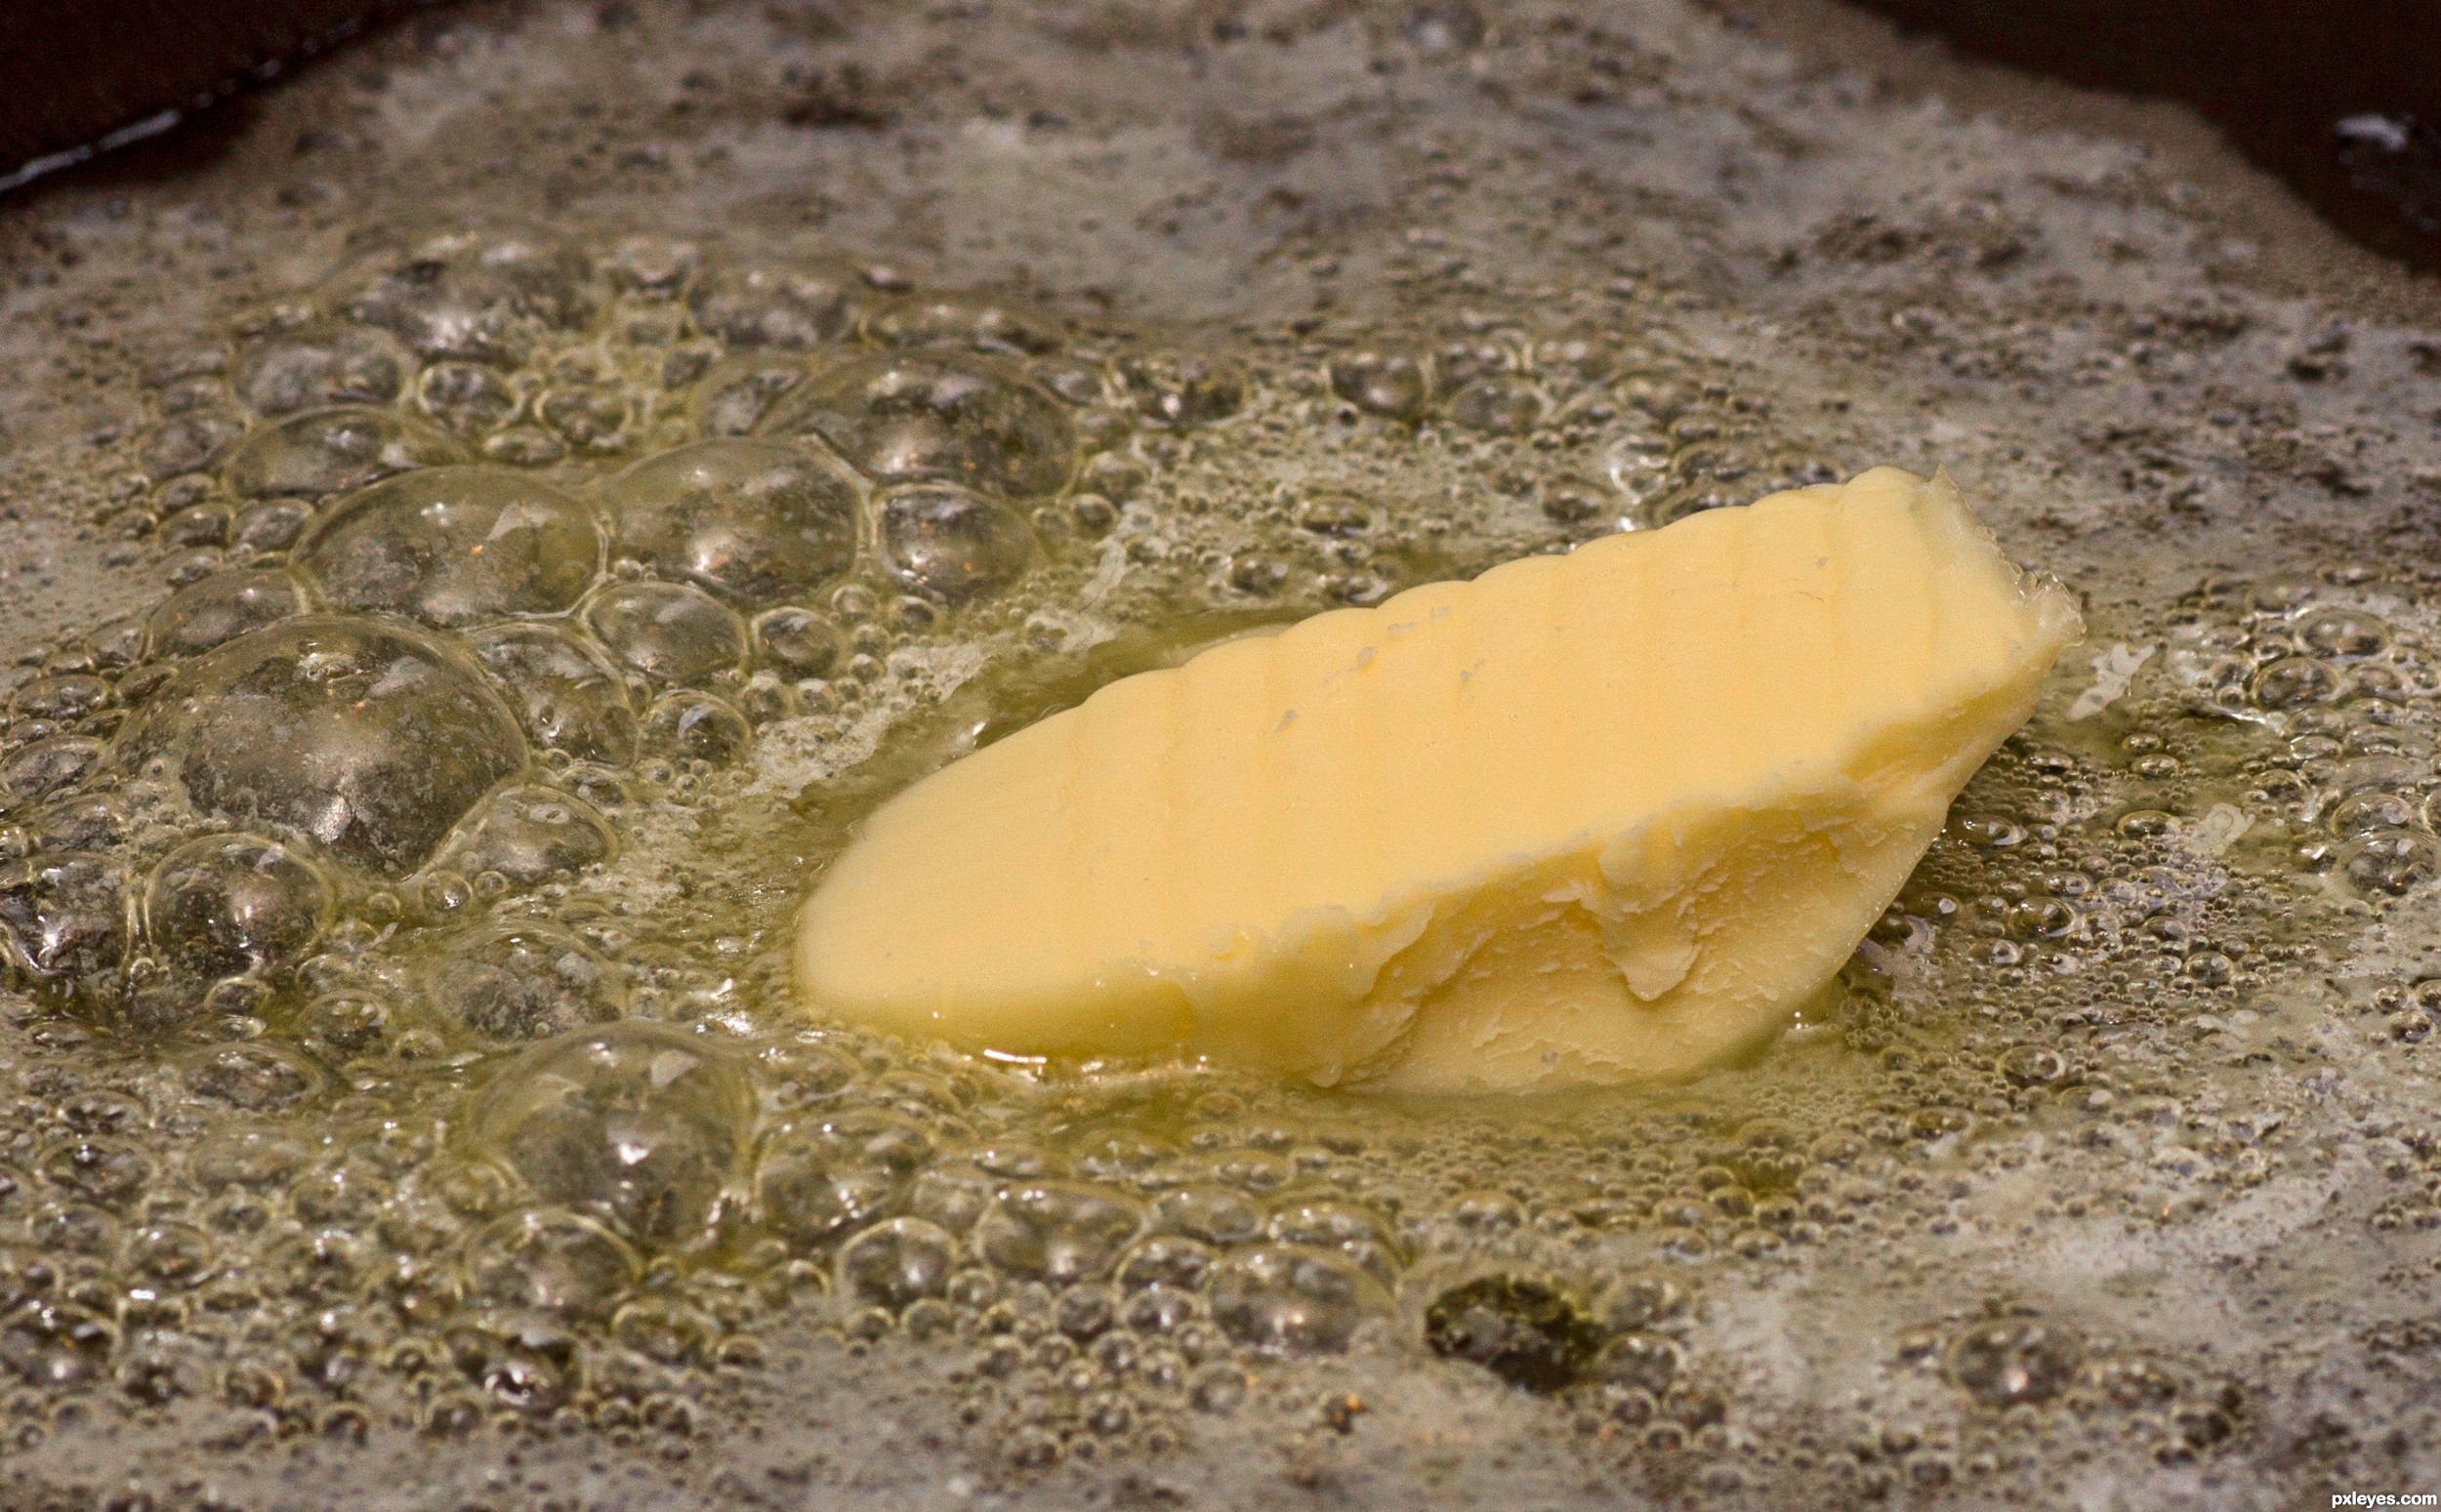 melting butter picture, by friiskiwi for: solid liquid photography ...